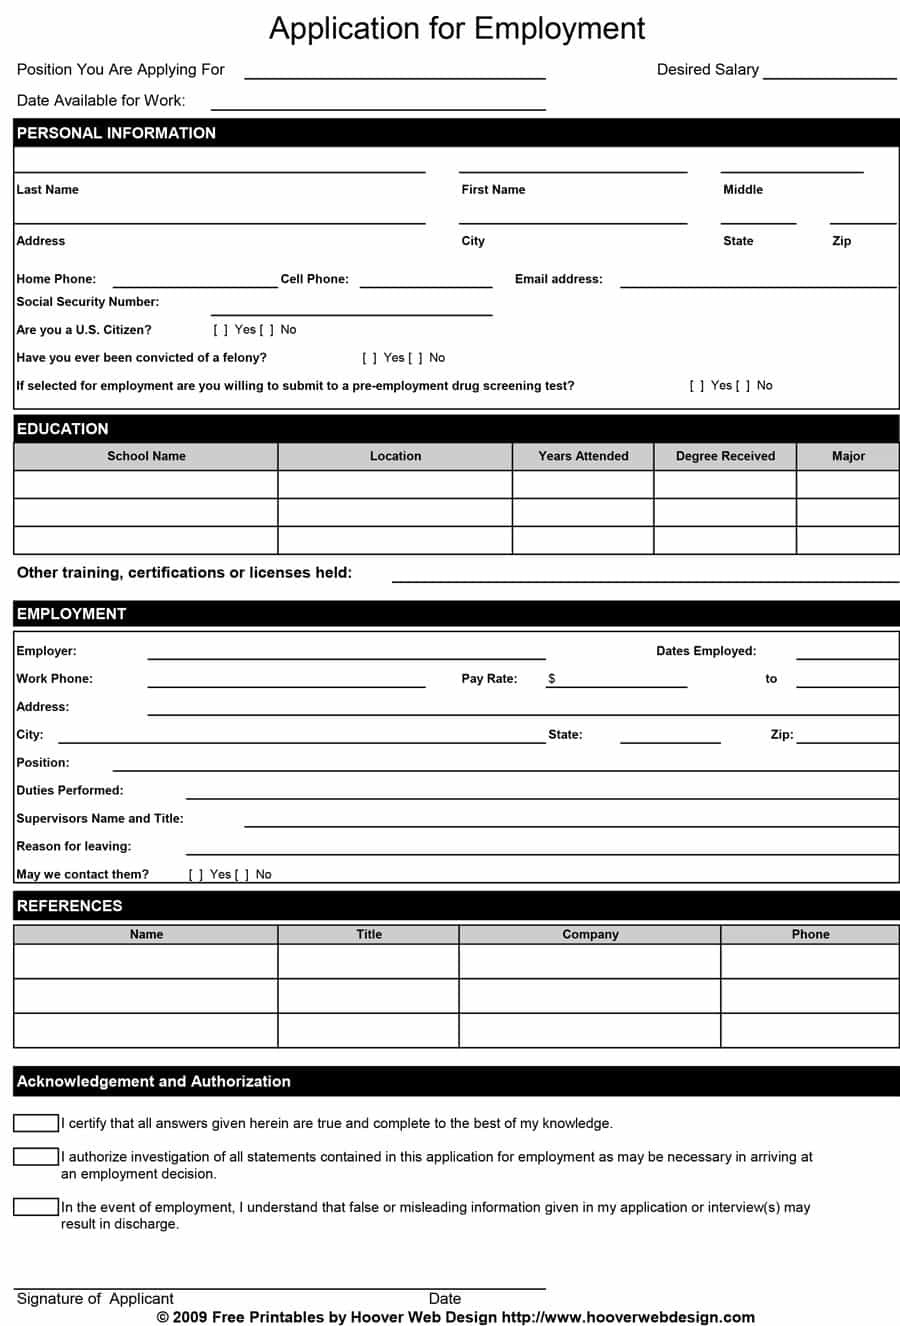 Free Printable Application For Employment Template | Writing Is Easy - Free Online Printable Applications